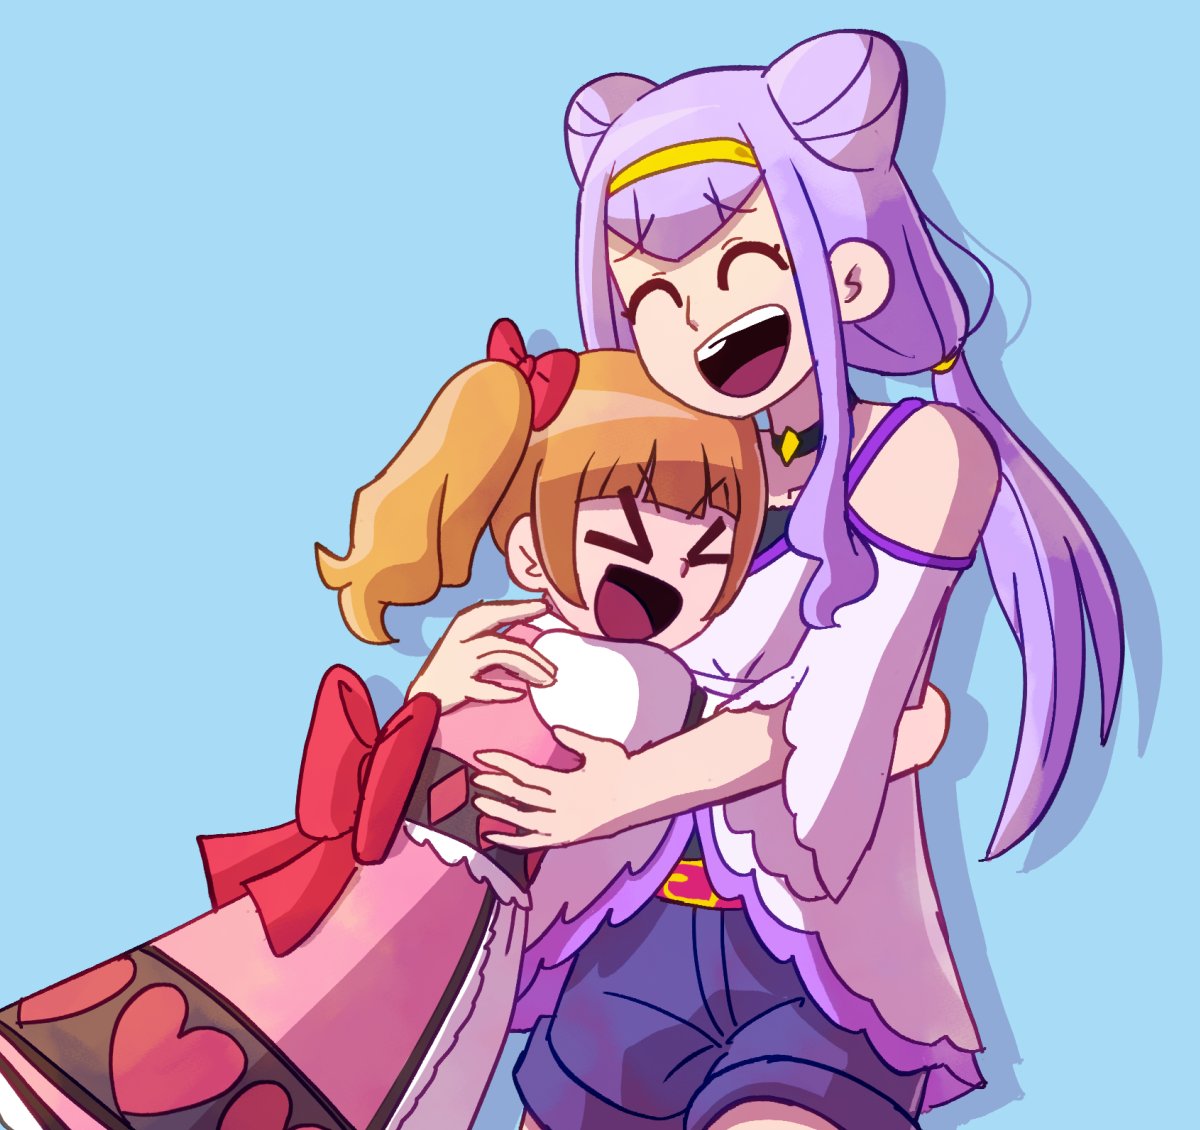 duo of all timeeee #precure